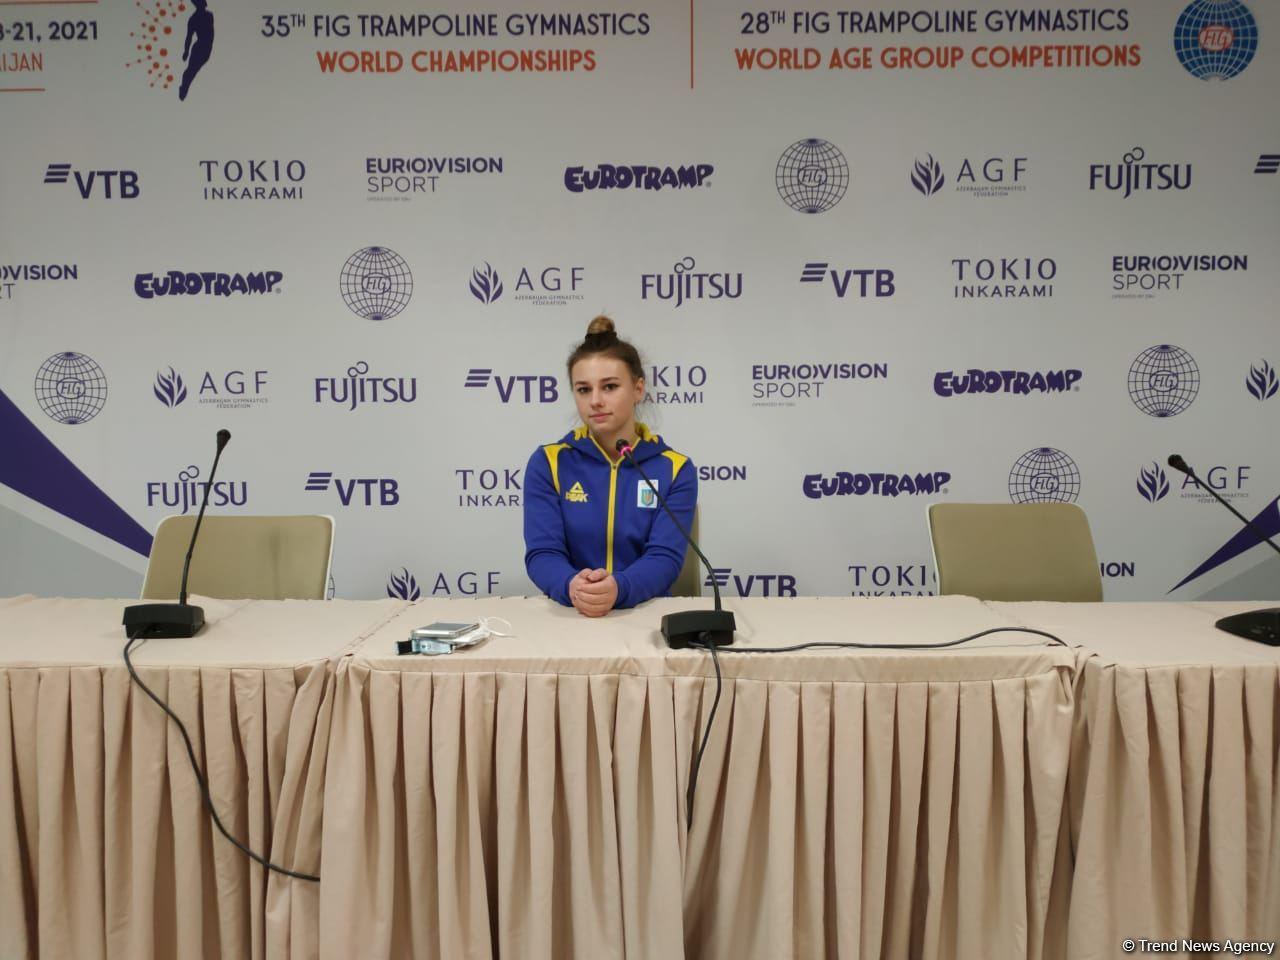 Baku creates excellent conditions at 28th FIG World Age Group Competitions – Ukrainian gymnast